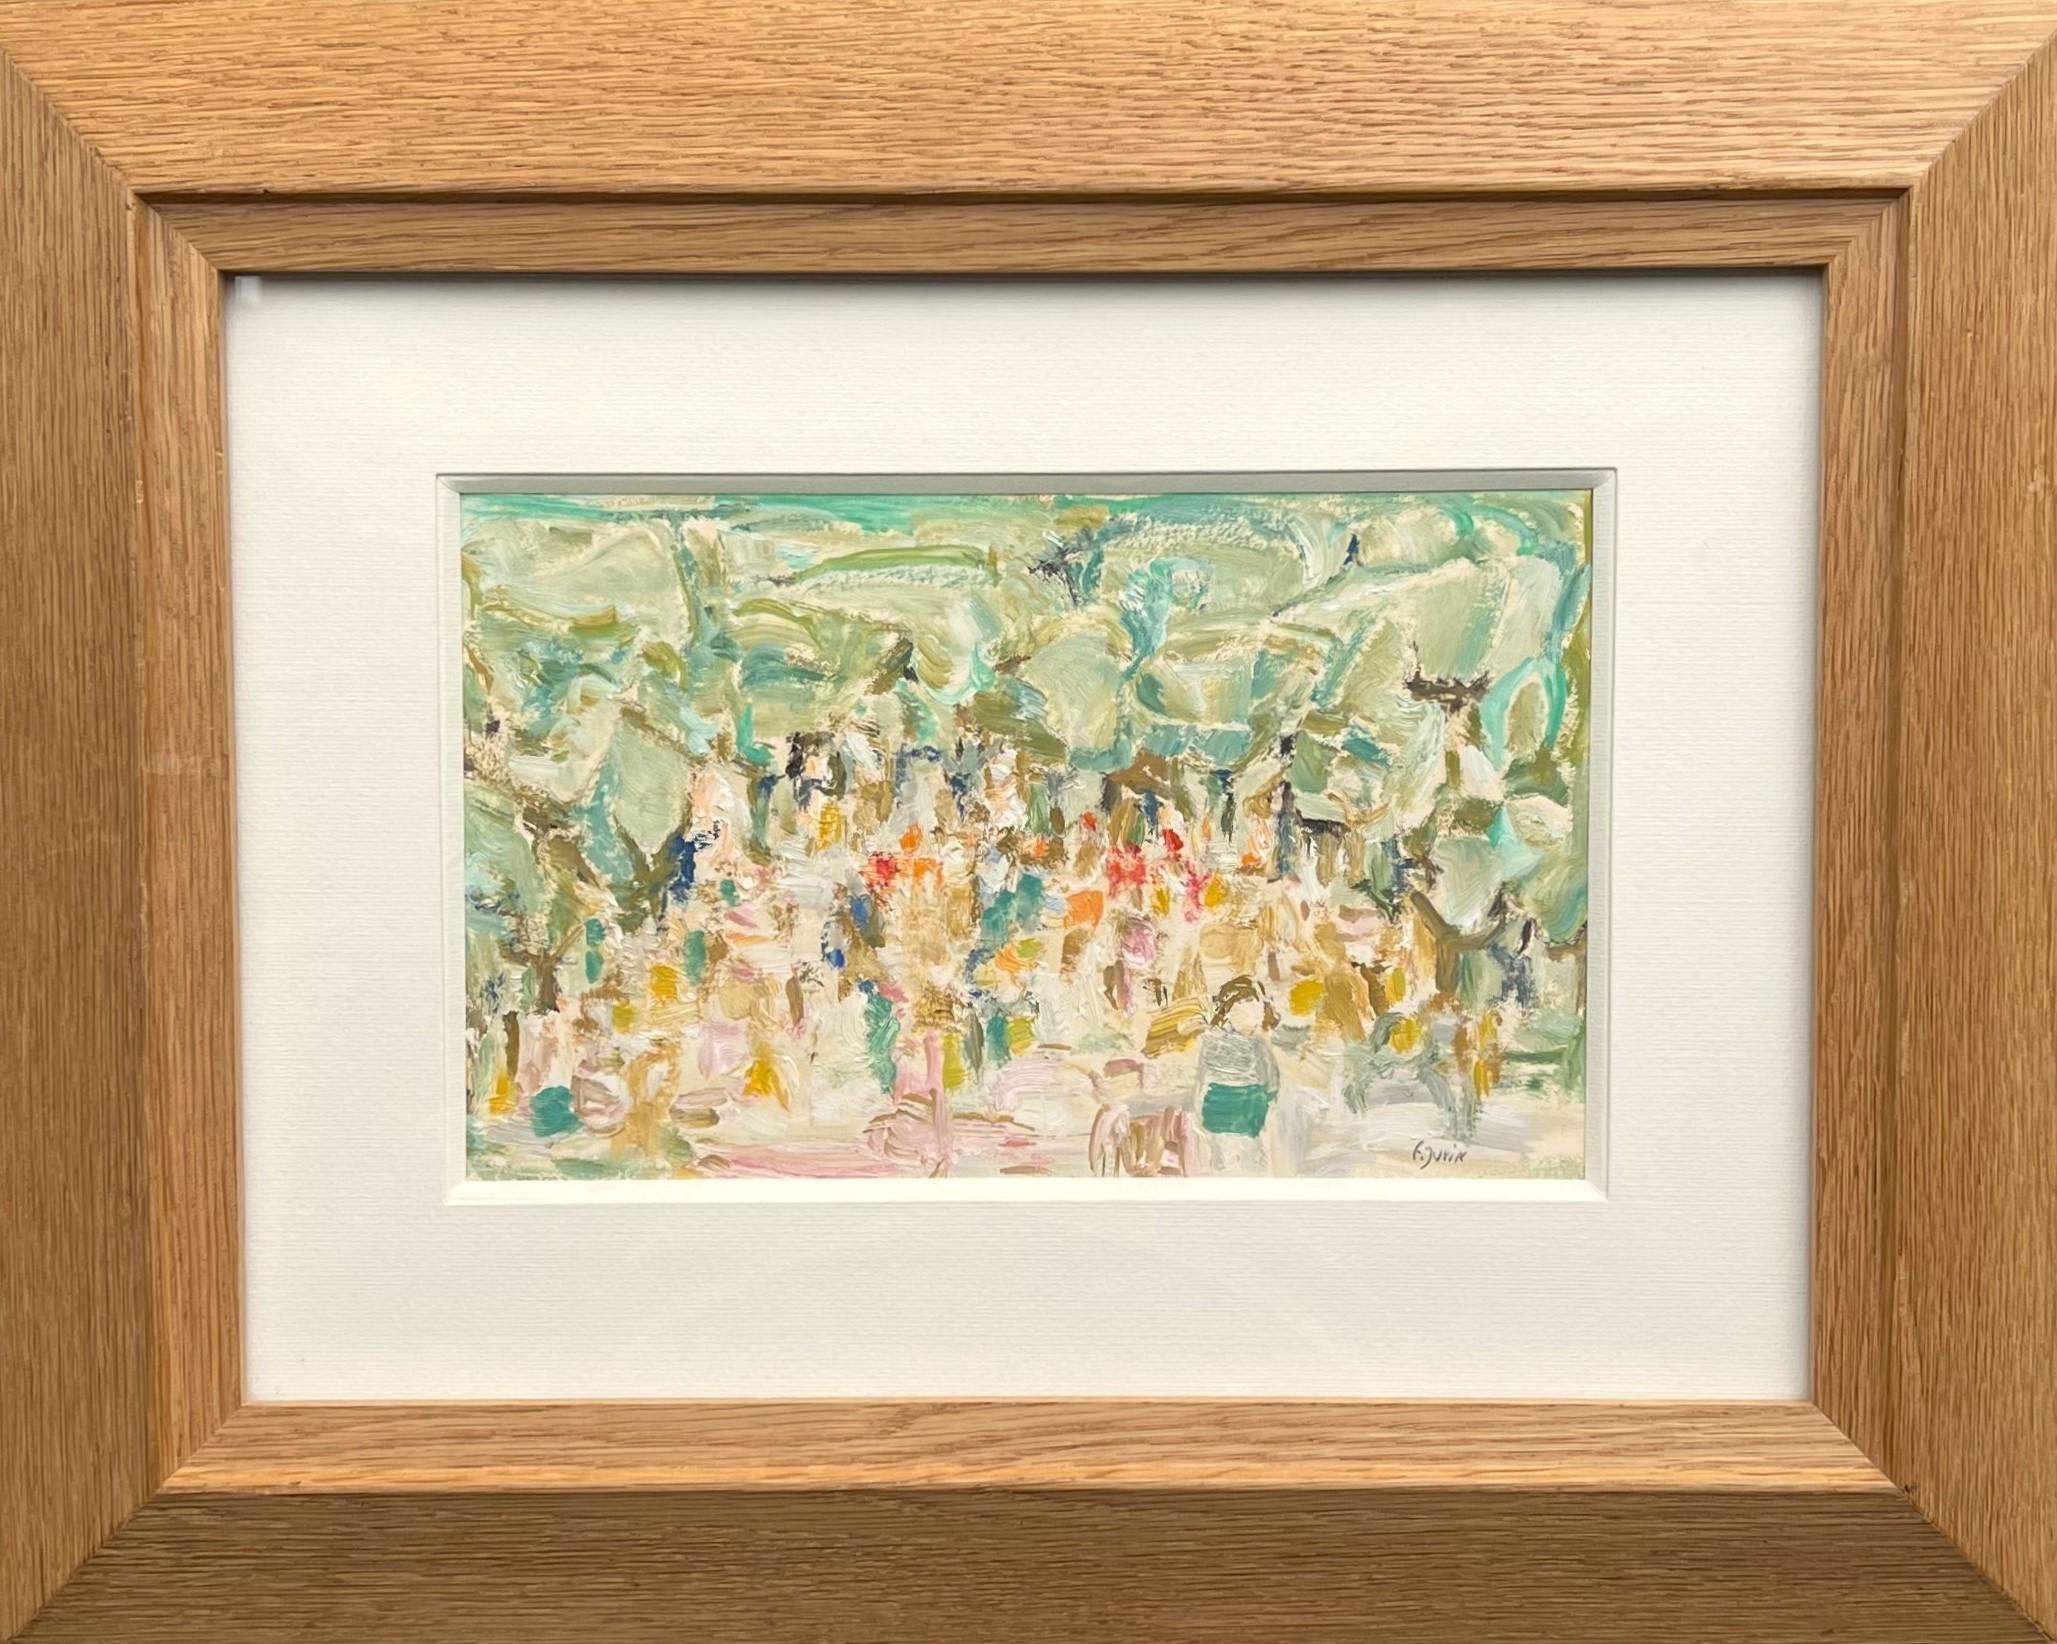 Françoise Juvin - Landscape with characters
Reference number FJ71
Framed with a natural oak frame. 
39,5 x 50 cm frame included (16 x 26 cm without frame)
This work is painted with oil on a paper. It is presented with a 5 cm beveled mat and under a